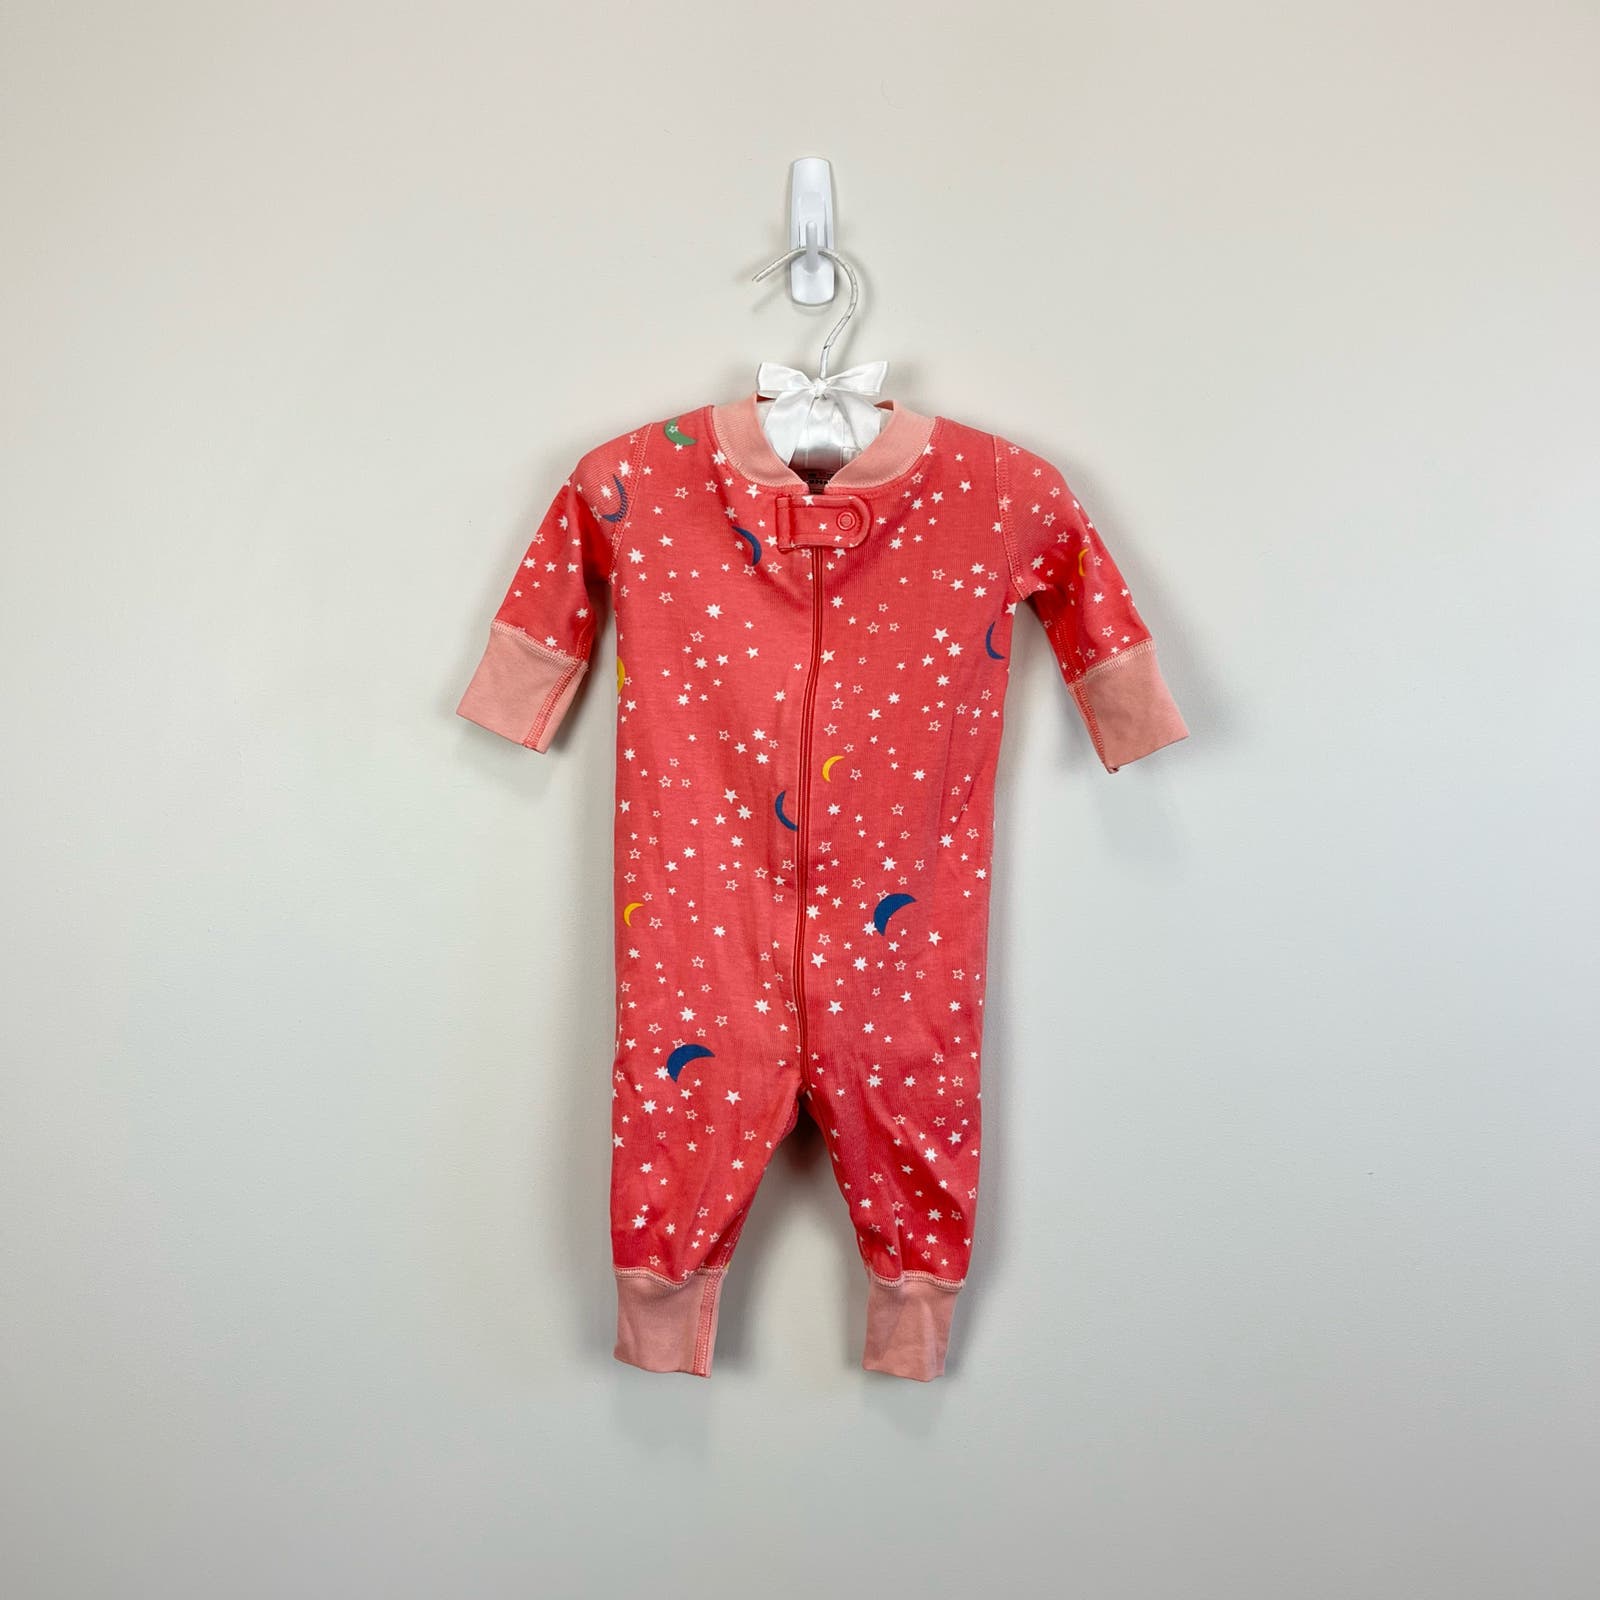 Hanna Andersson Pink Stars and Moon Pajamas 50 cm (0-6 Months)